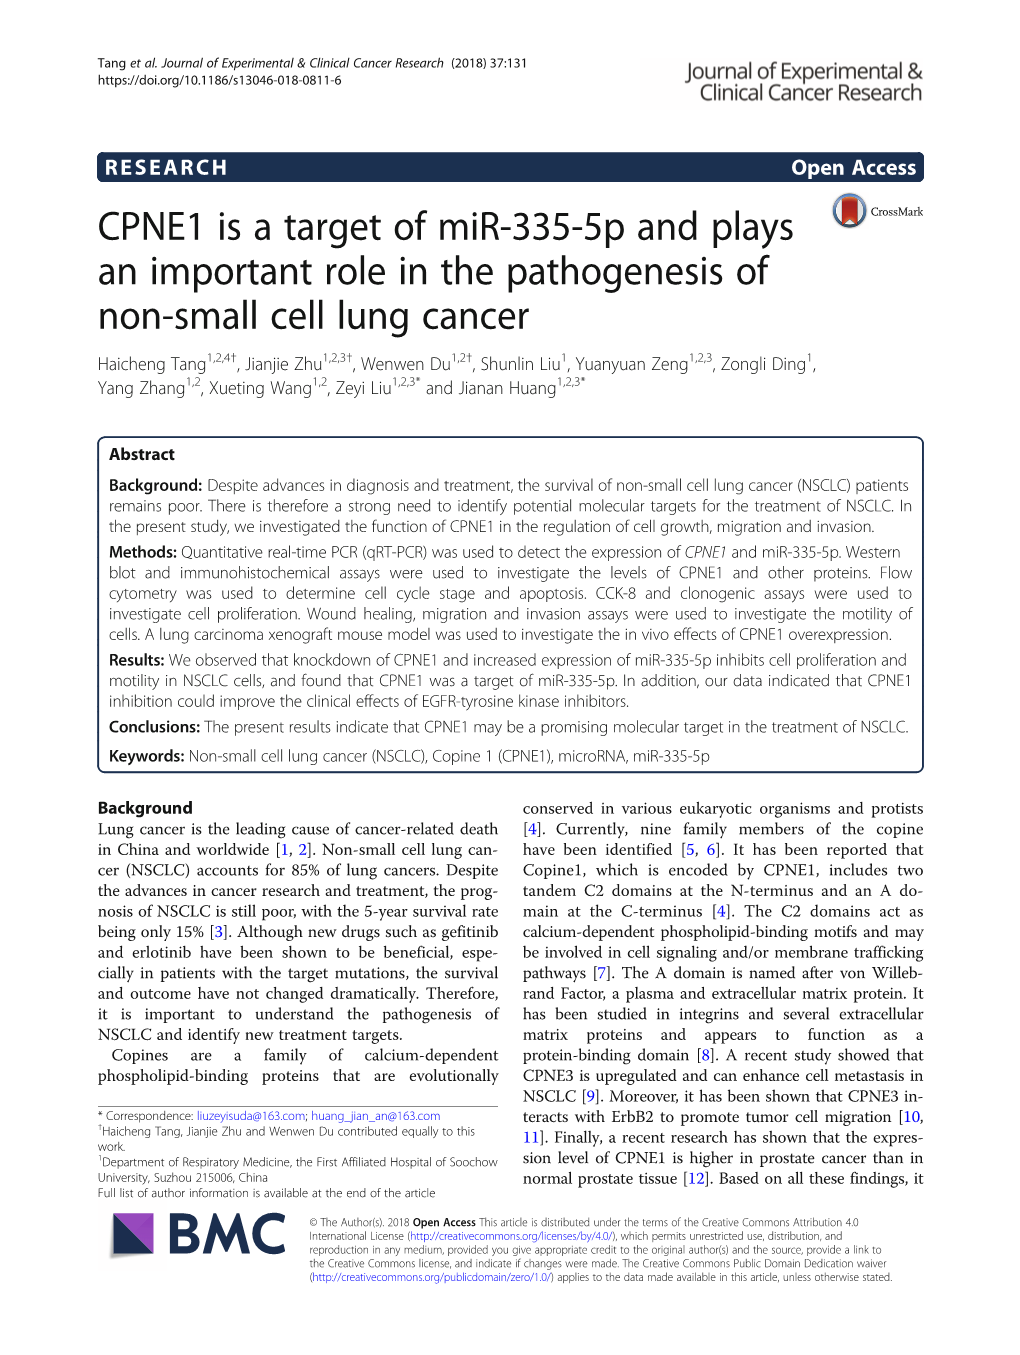 CPNE1 Is a Target of Mir-335-5P and Plays an Important Role in The